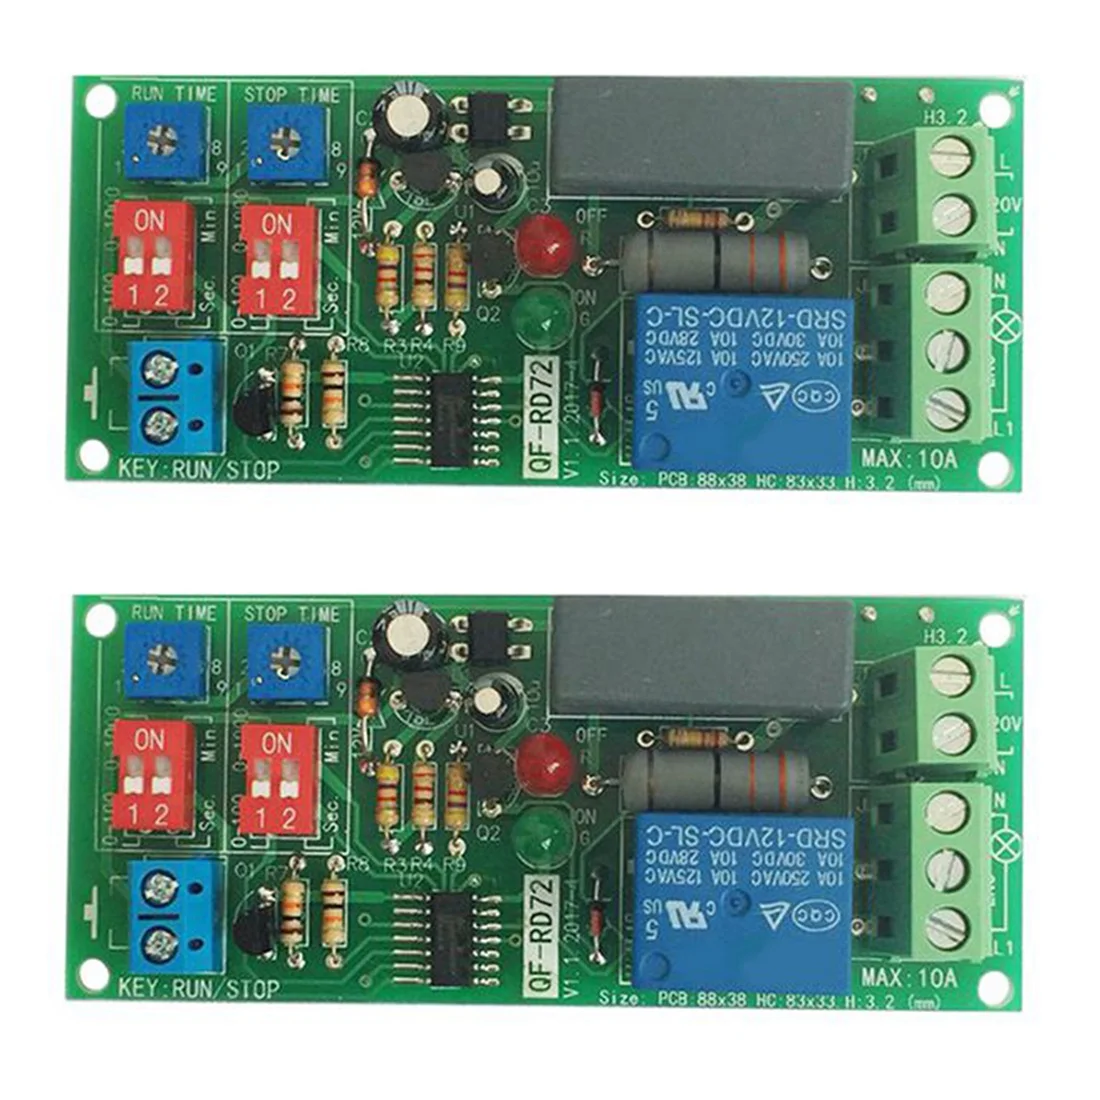 

2PCs Dual Time Adjustable Cycle Delay Timing Relay Repeat on OFF Switch Infinite Loop Timer Module AC 100V 110V 240V